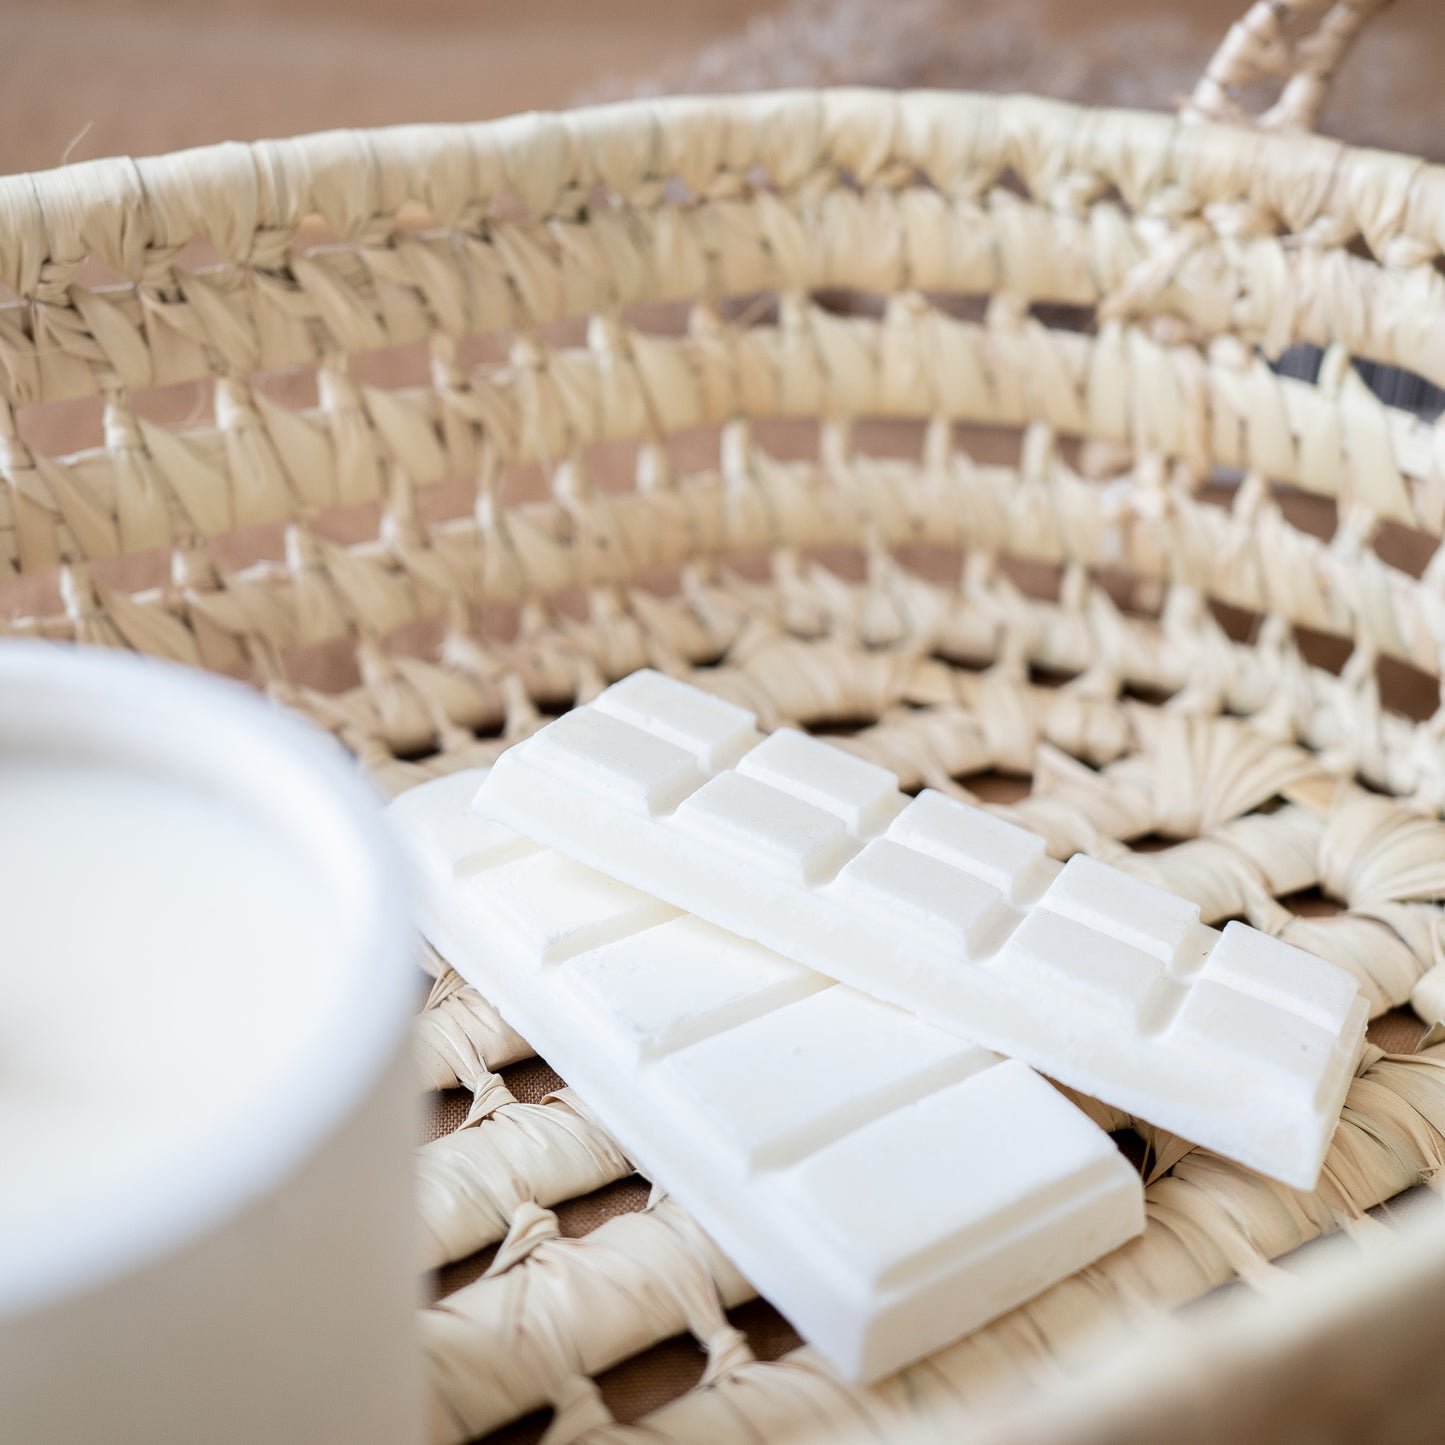 Two break-away wax melts laying in a basket. Made by Paige Soy Candles